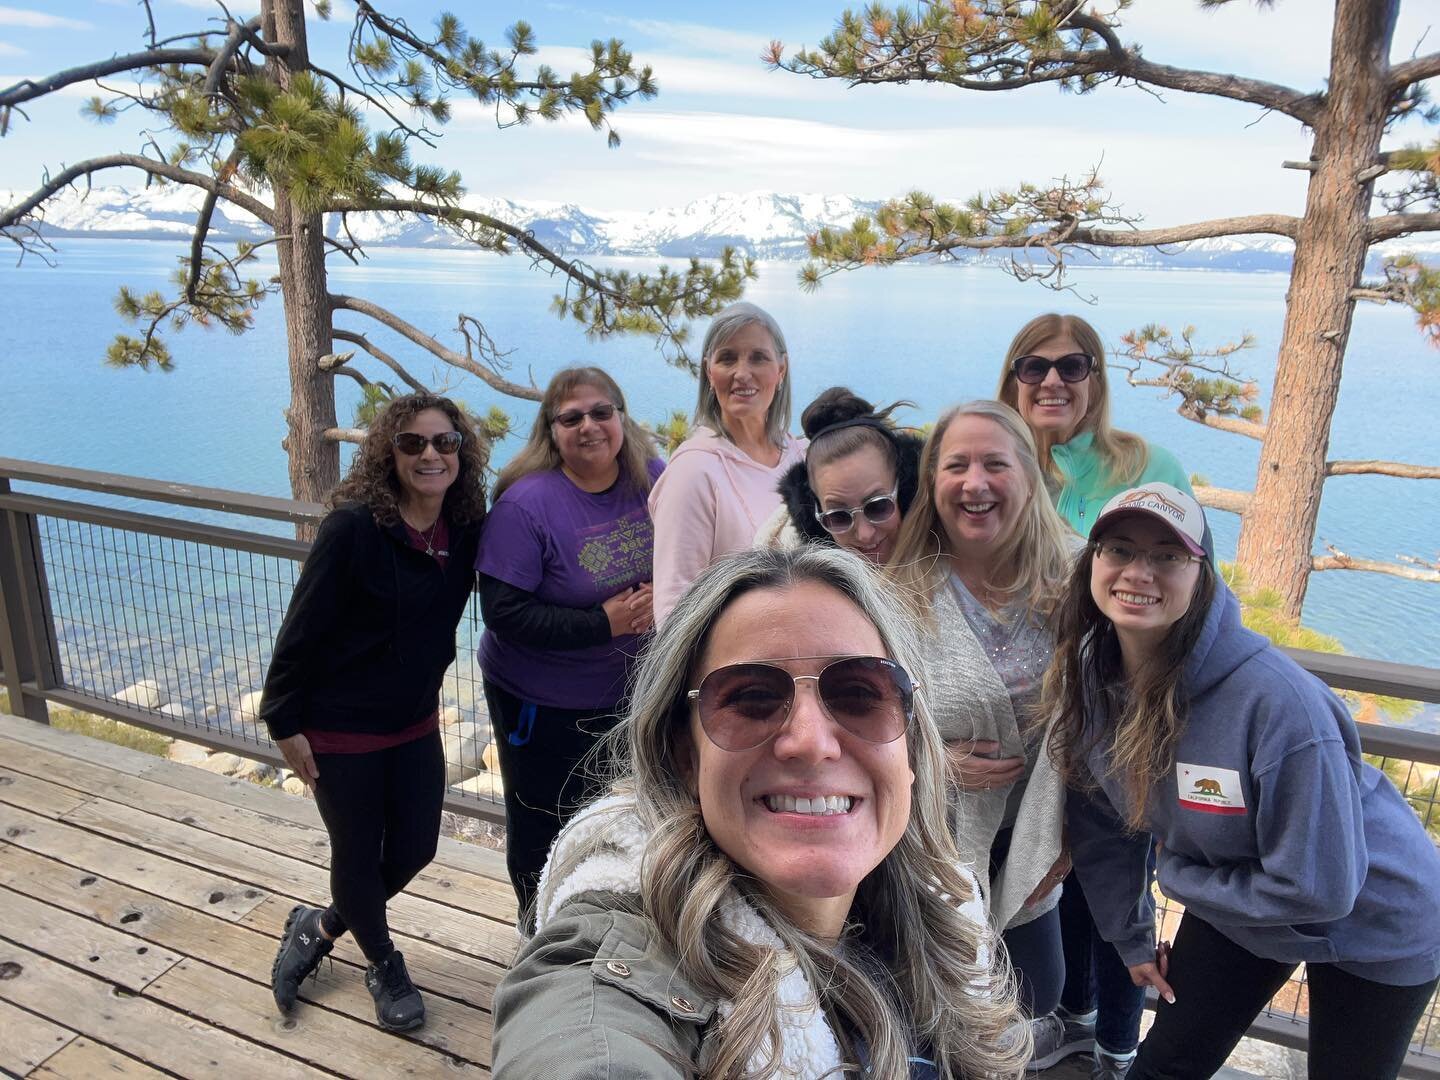 This group of beautiful women have been a huge support to me the last few weeks! First it was beyond a blessing to spend a short weekend with them- praying, worshipping, hiking, eating&hellip; all the good things!!😊❤️ 

But then when I really needed